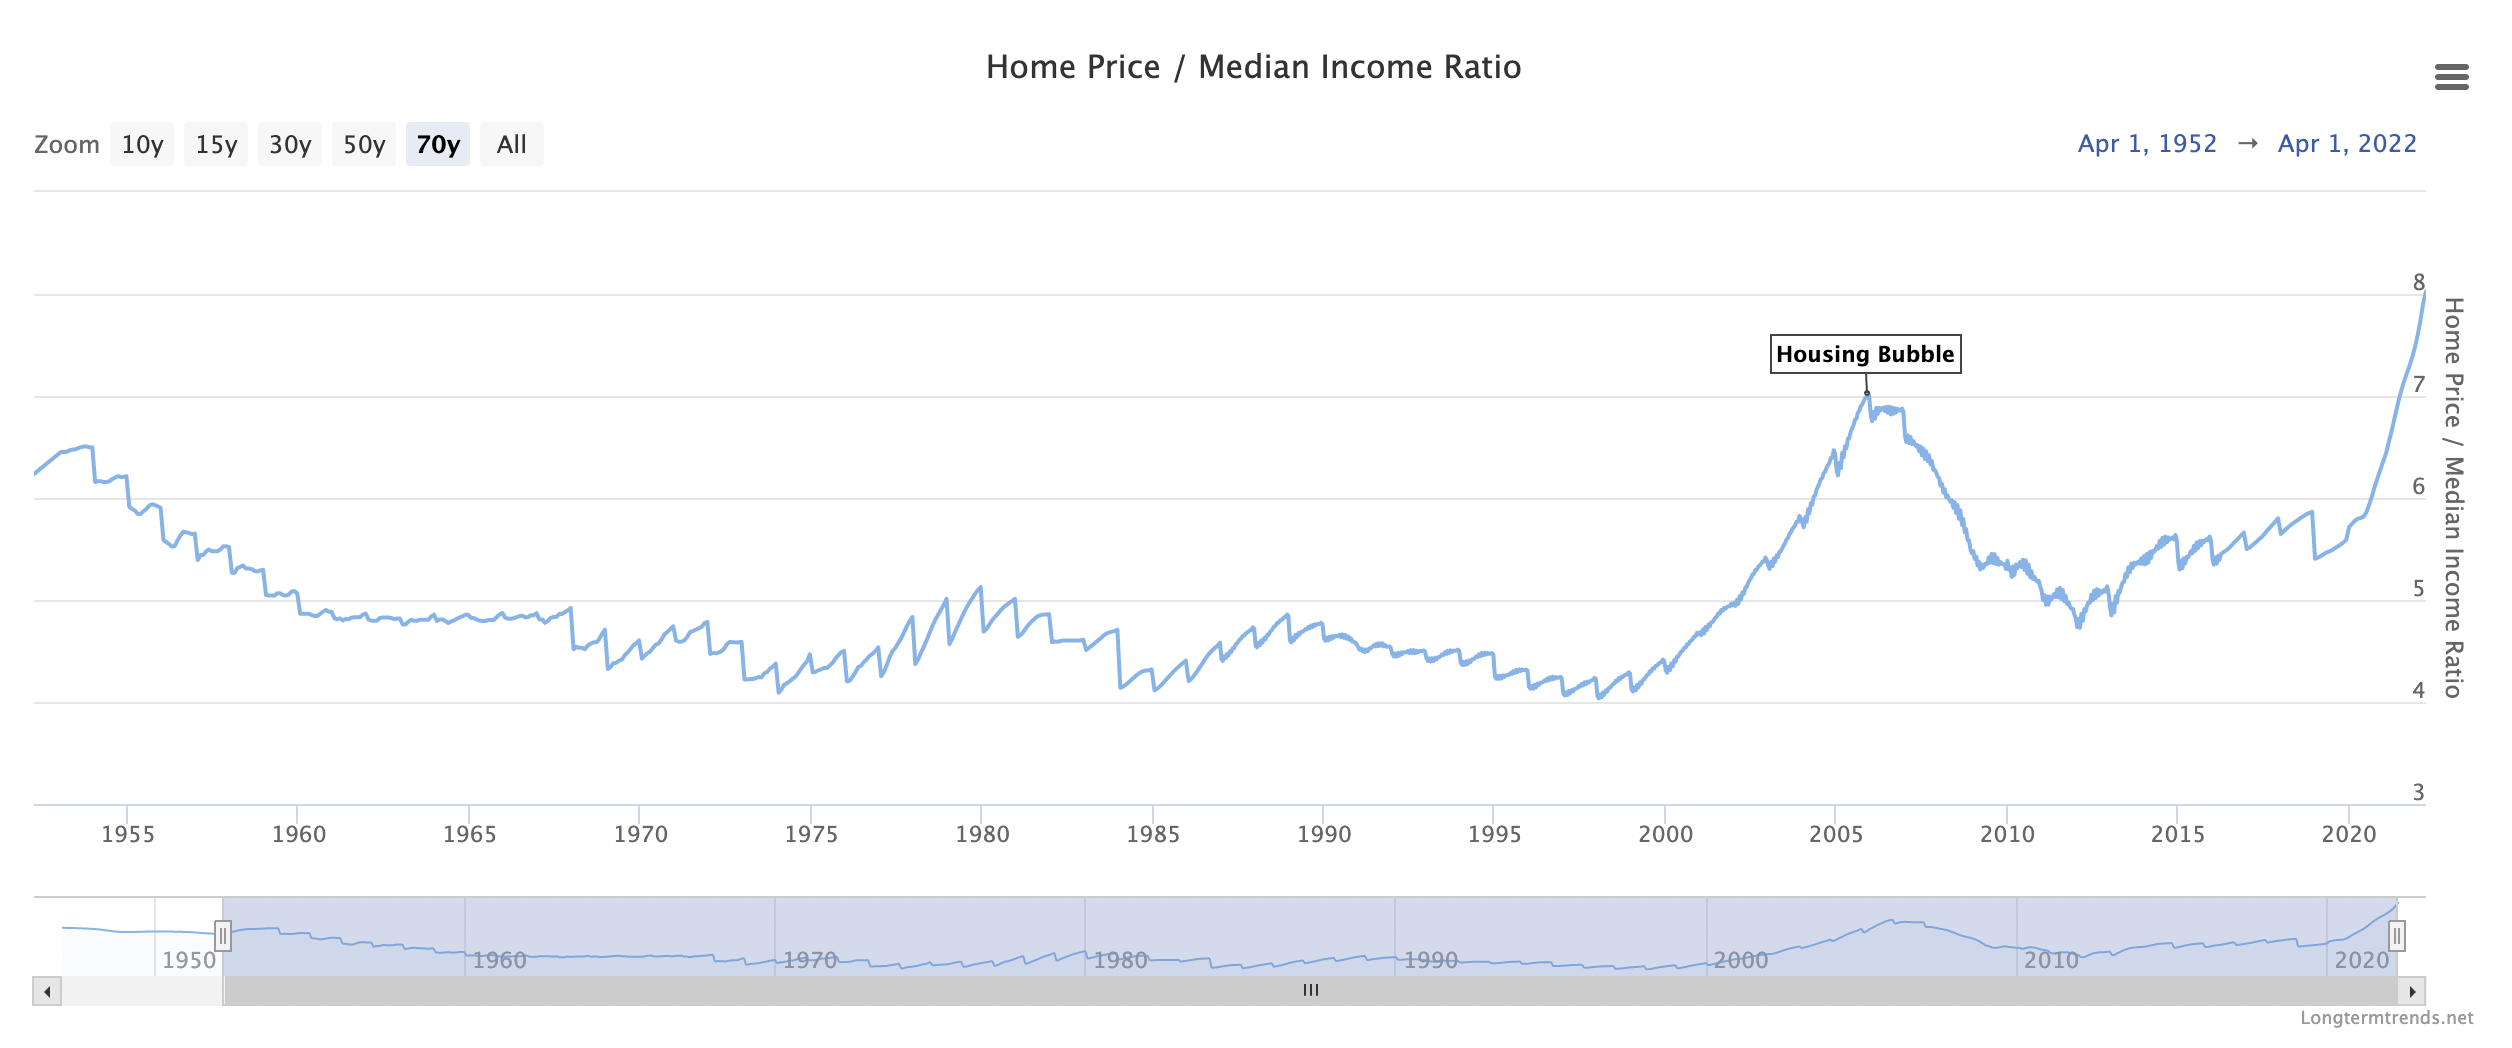 Source: https://www.longtermtrends.net/home-price-median-annual-income-ratio/#:~:text=Historically%2C%20an%20average%20house%20in,times%20the%20yearly%20household%20income.